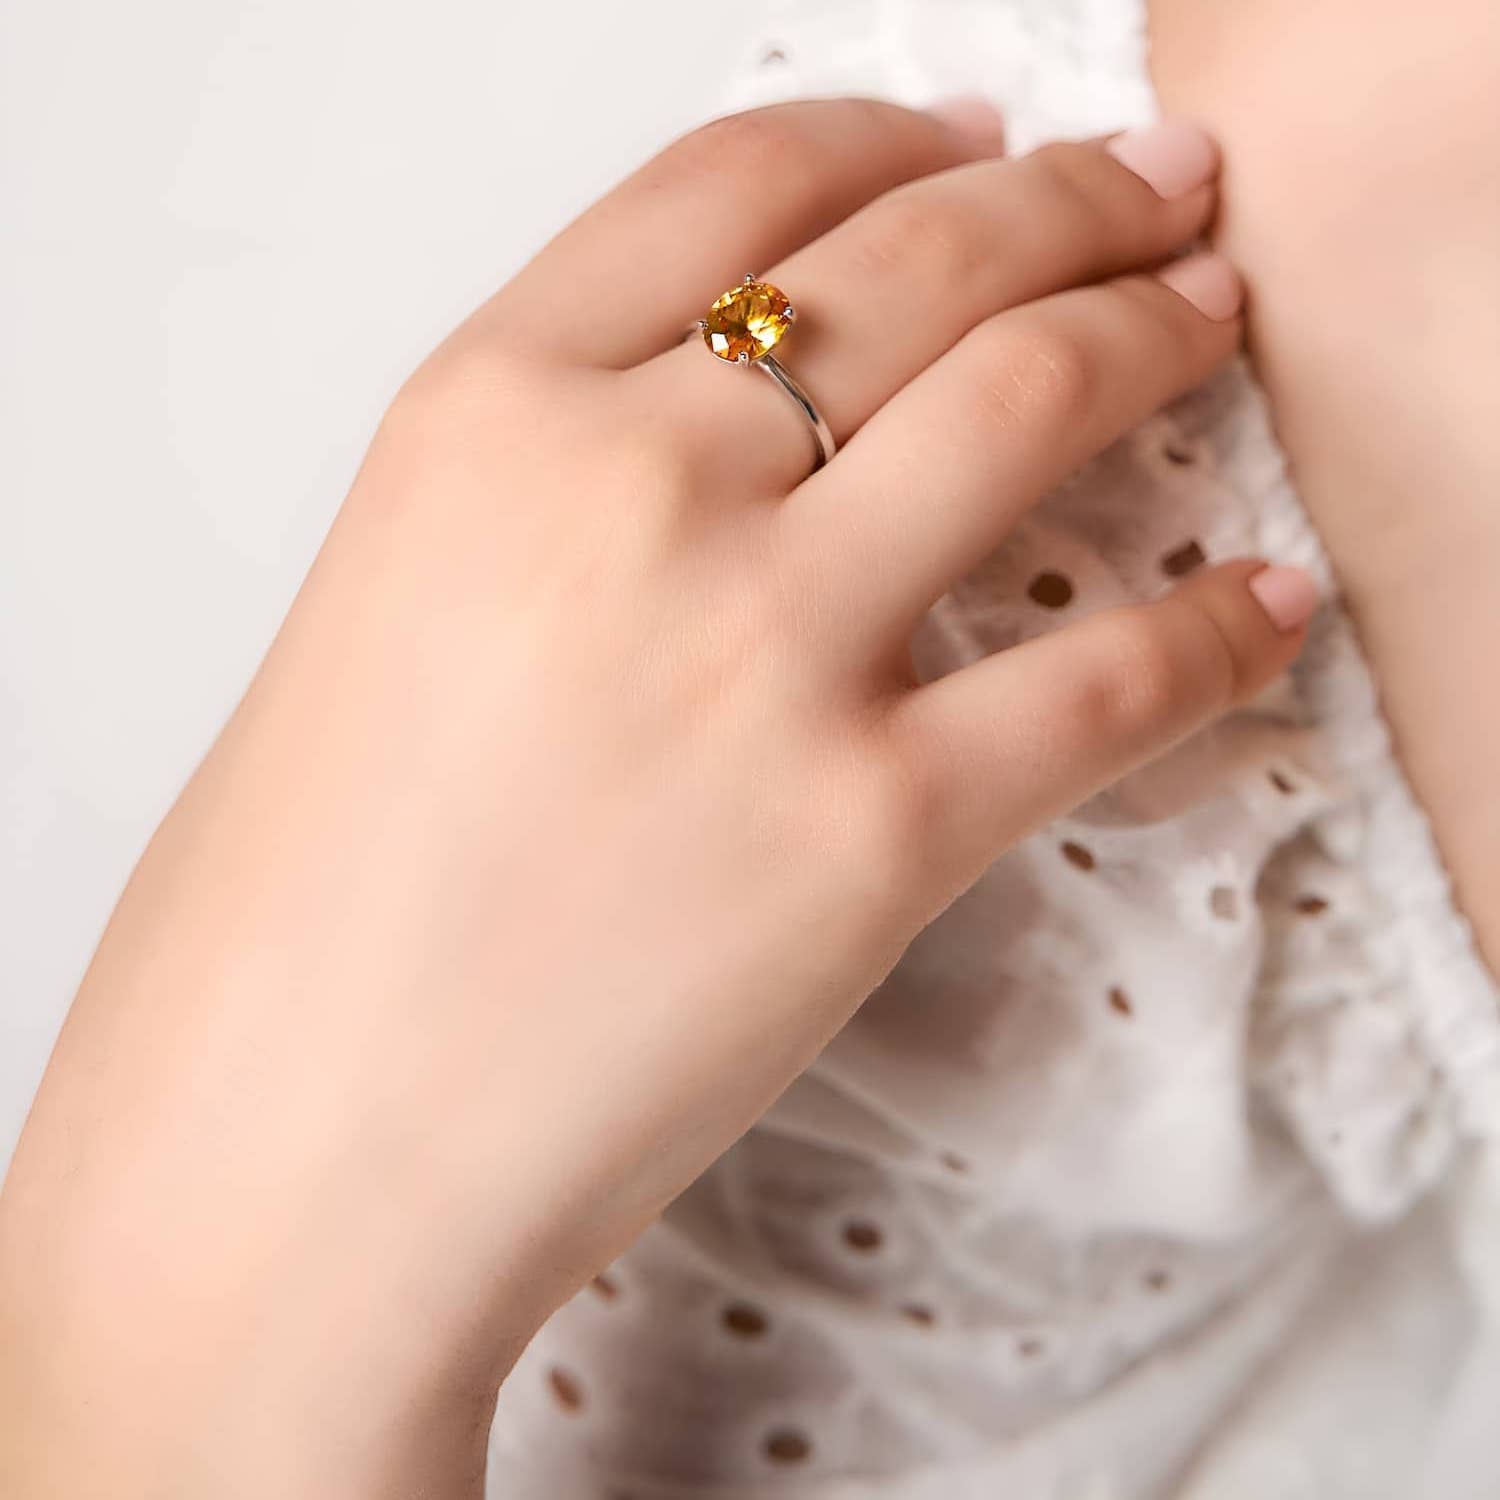 Model wearing the golden sapphire ring